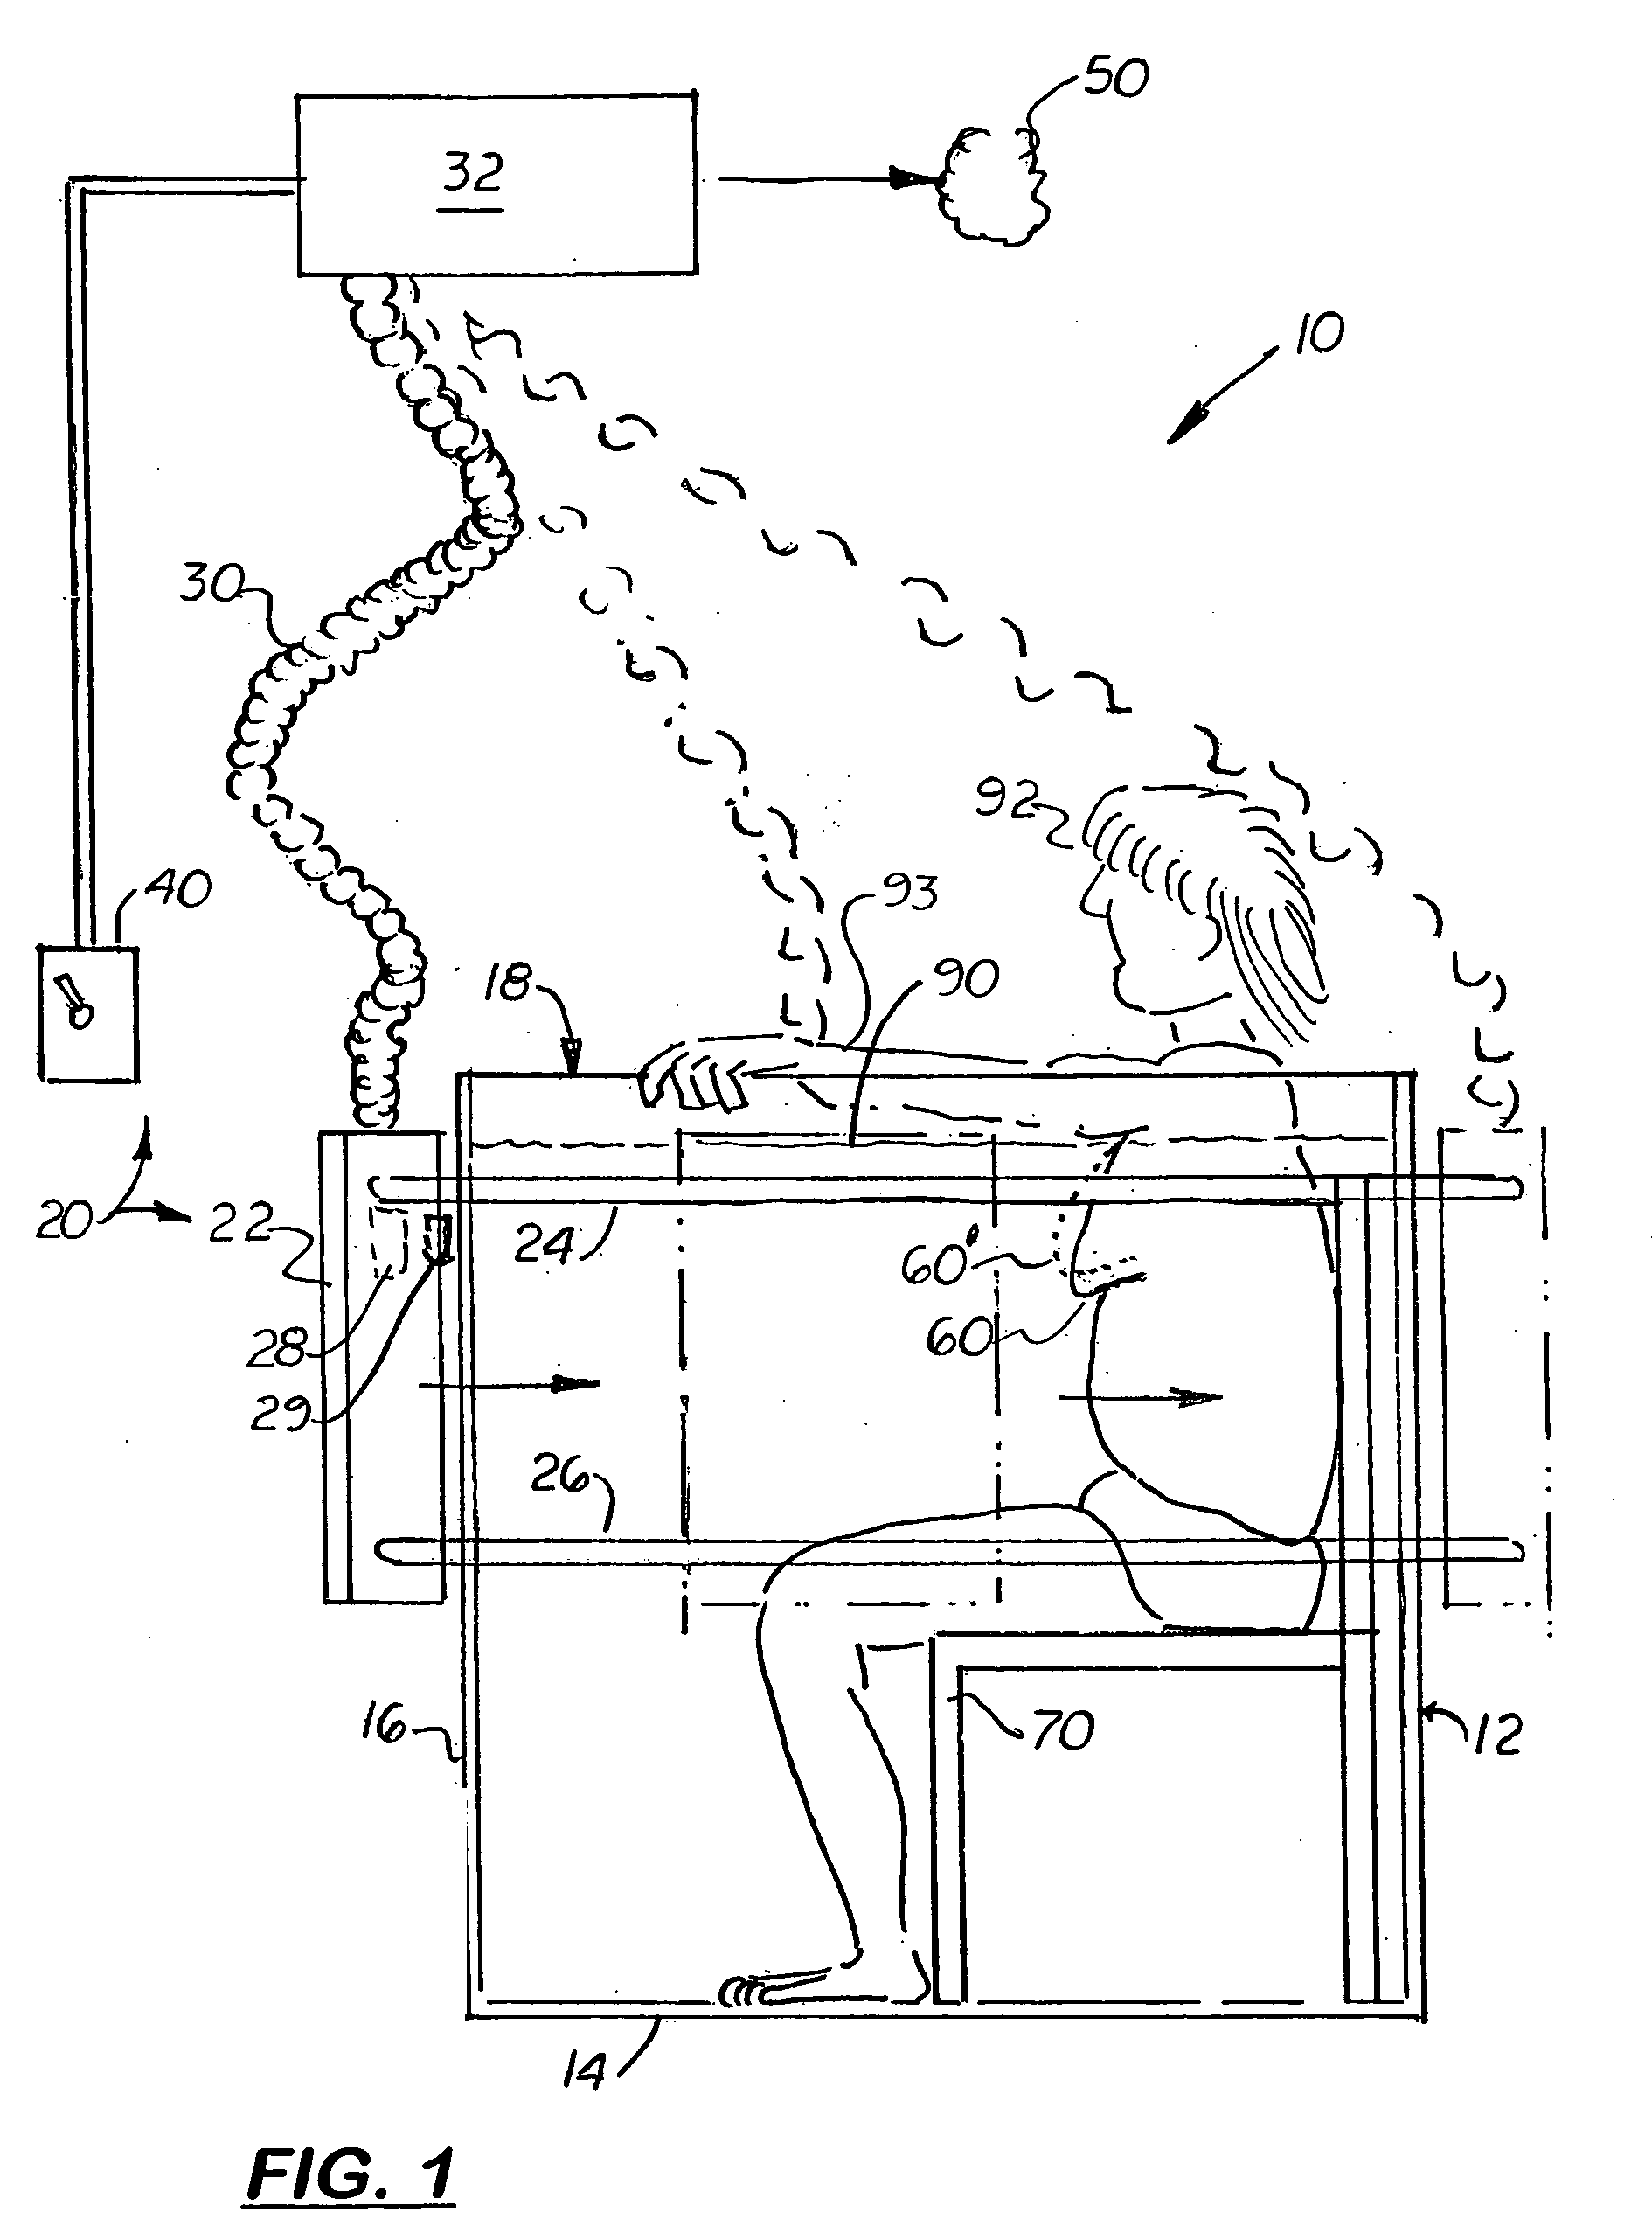 Breast measurement device and bra fitting system